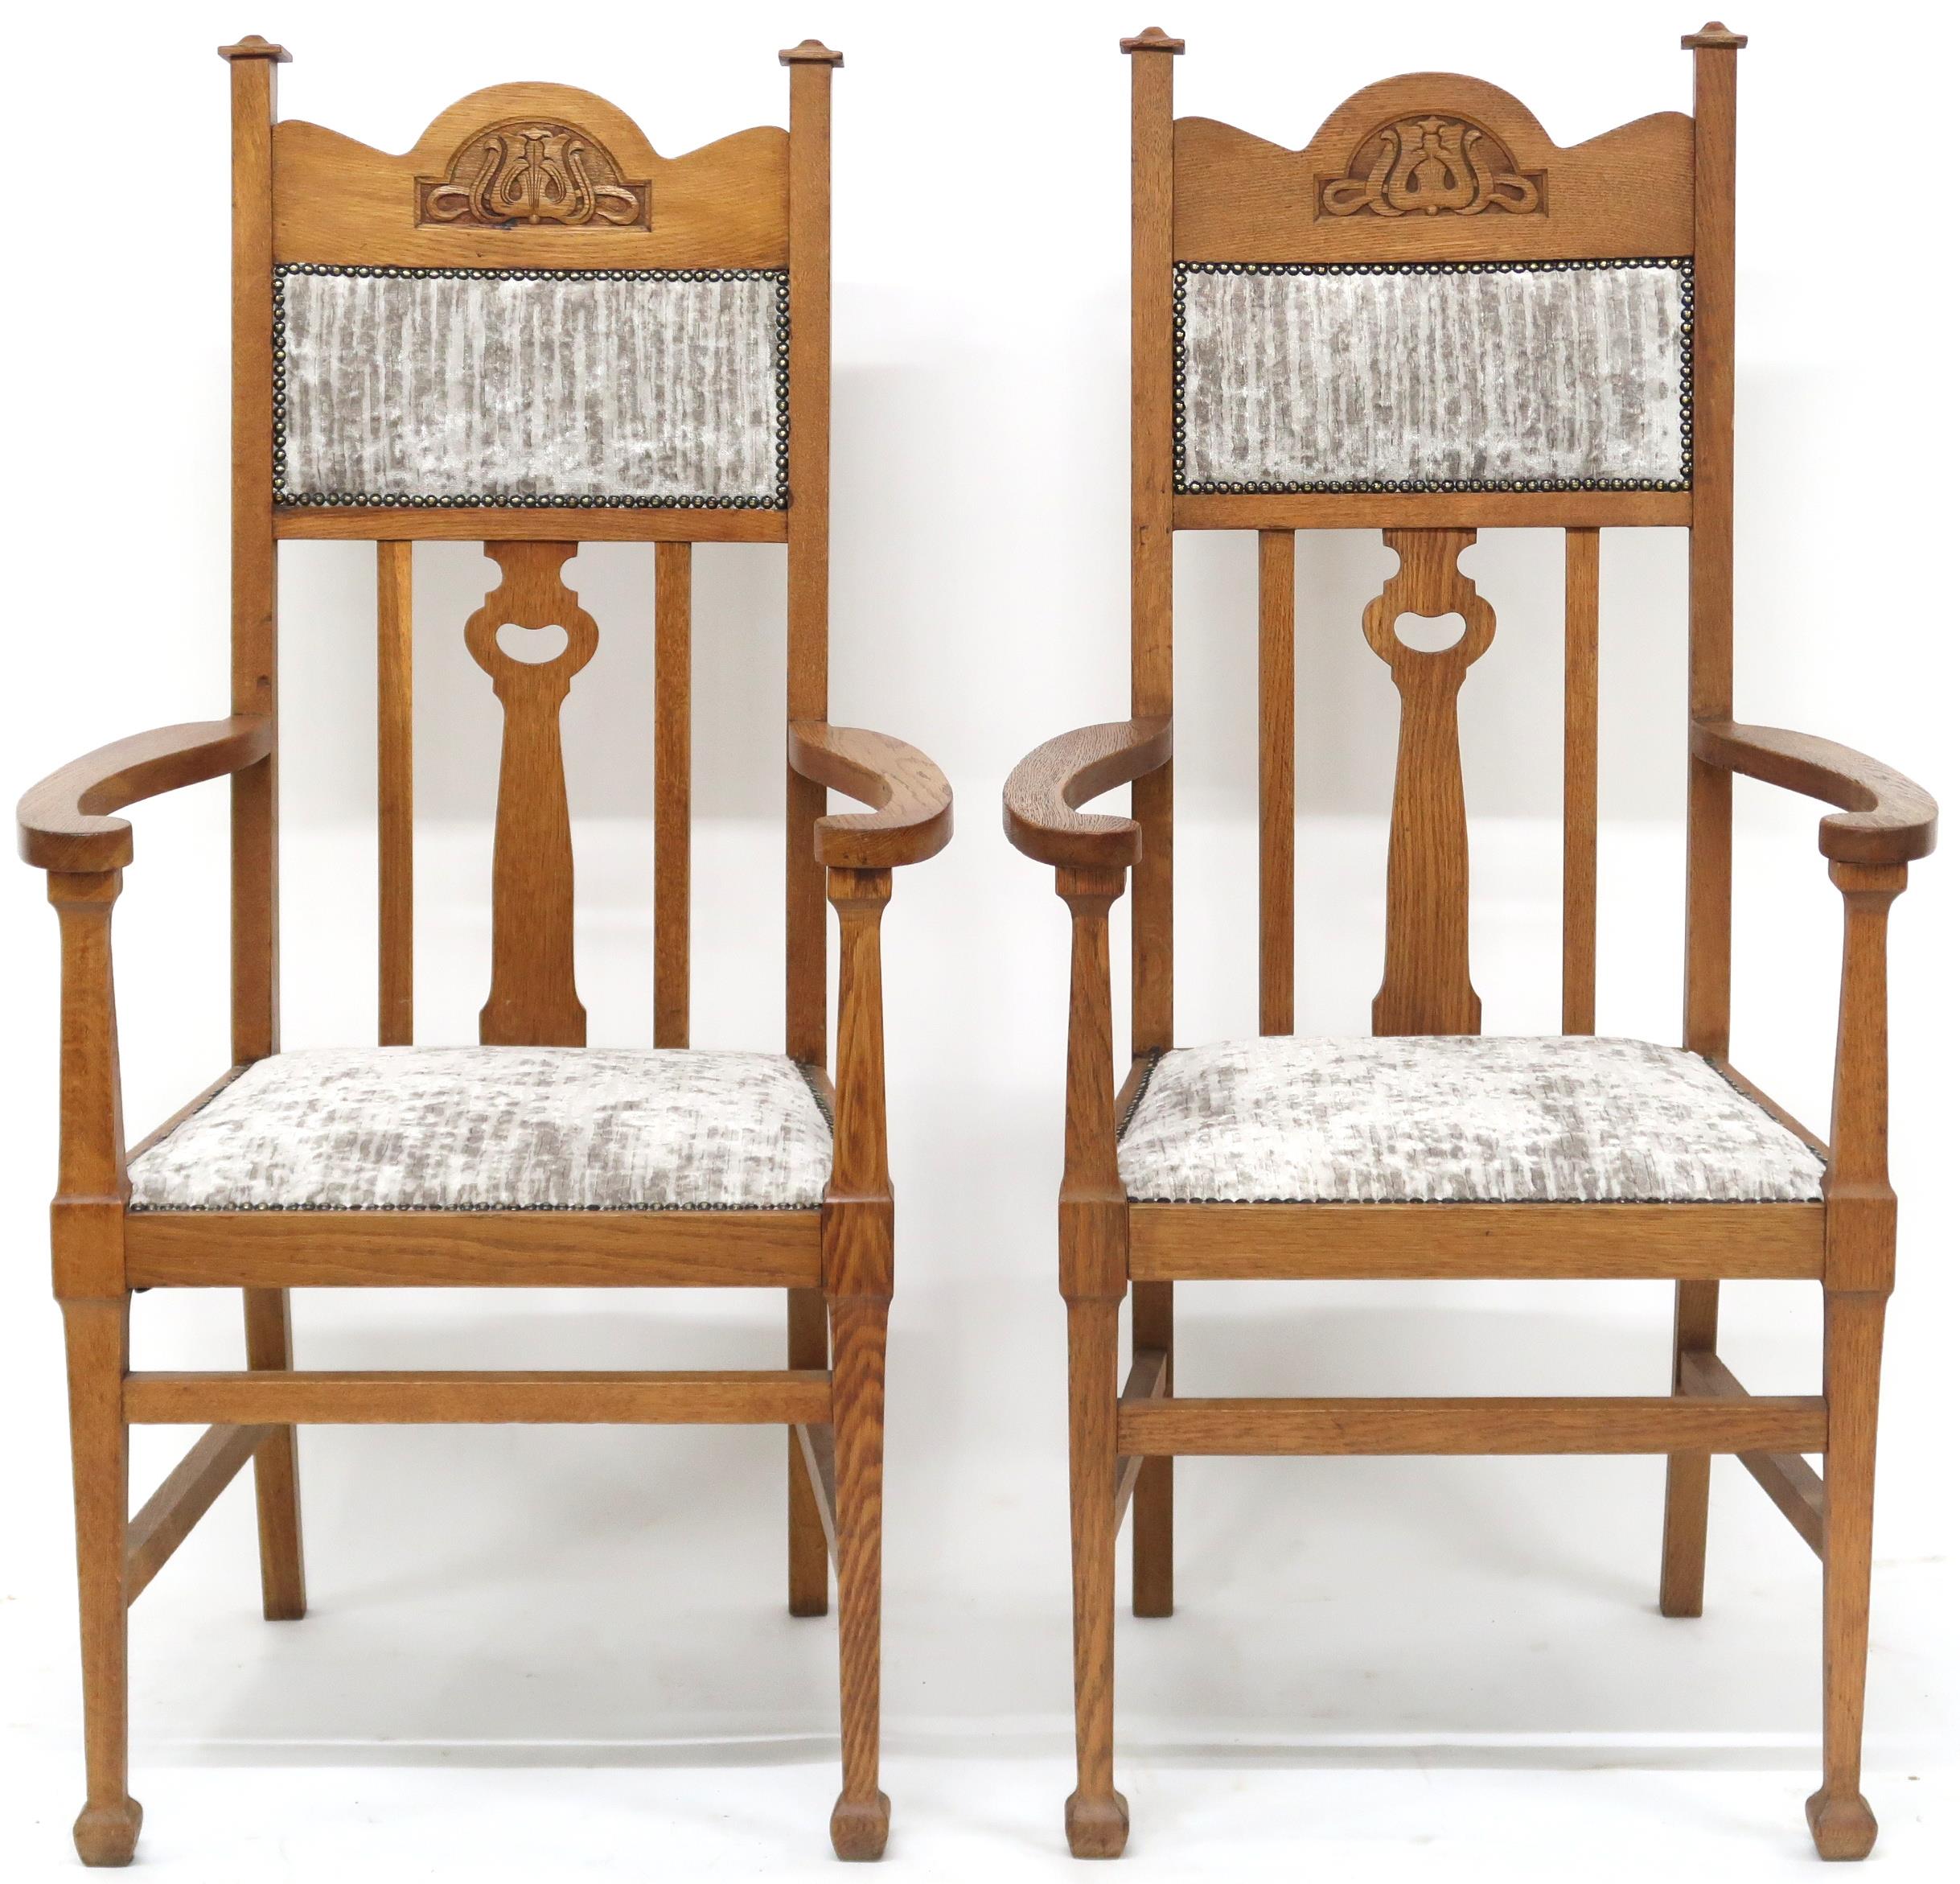 A PAIR OF LATE VICTORIAN OAK ARTS & CRAFTS OPEN ARMCHAIRS  with grey velvet upholstery on backrest